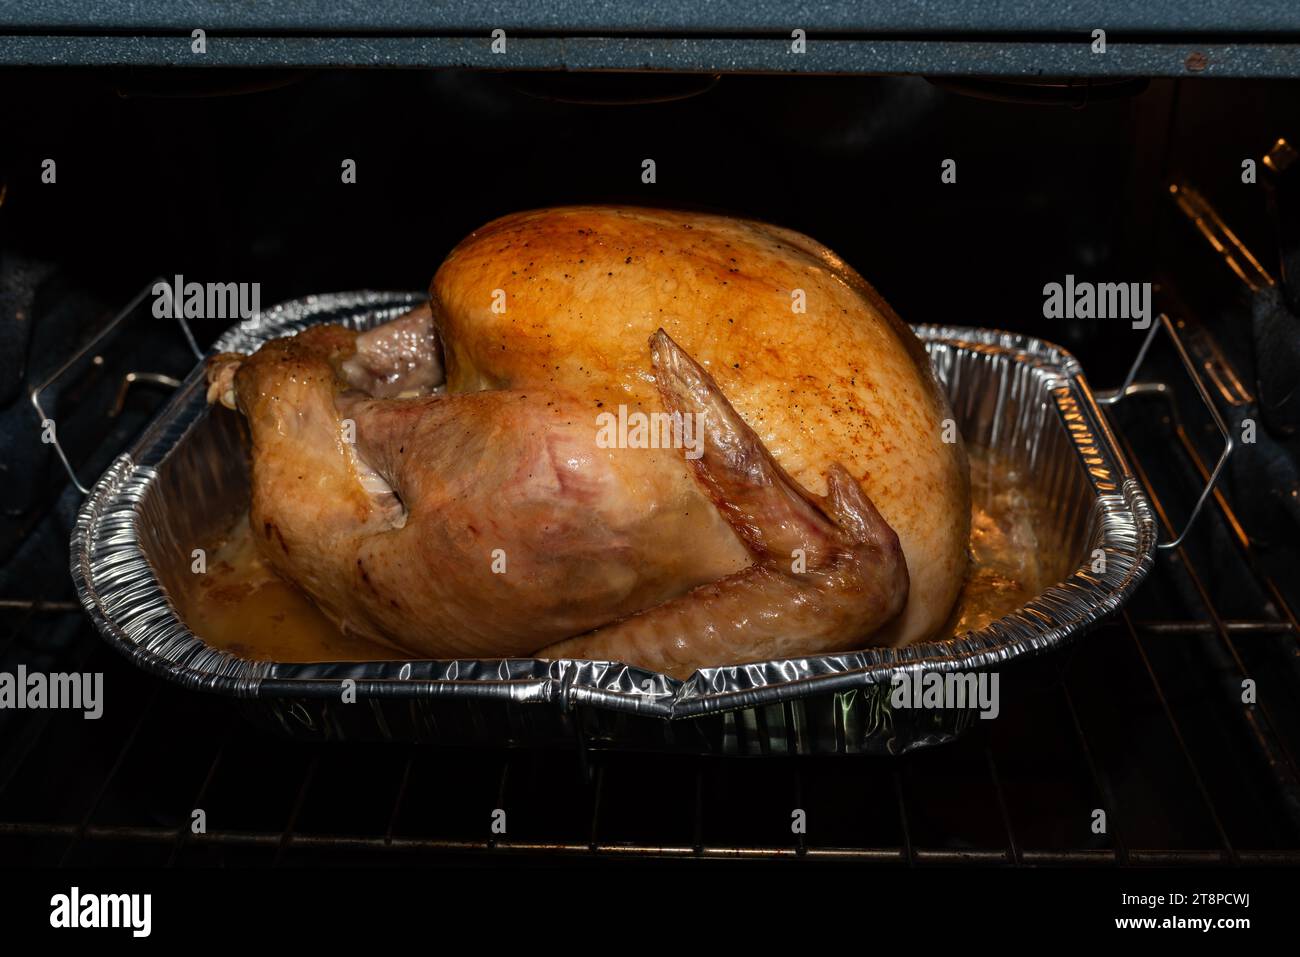 Oven Roasted Turkey in Oven Stock Photo